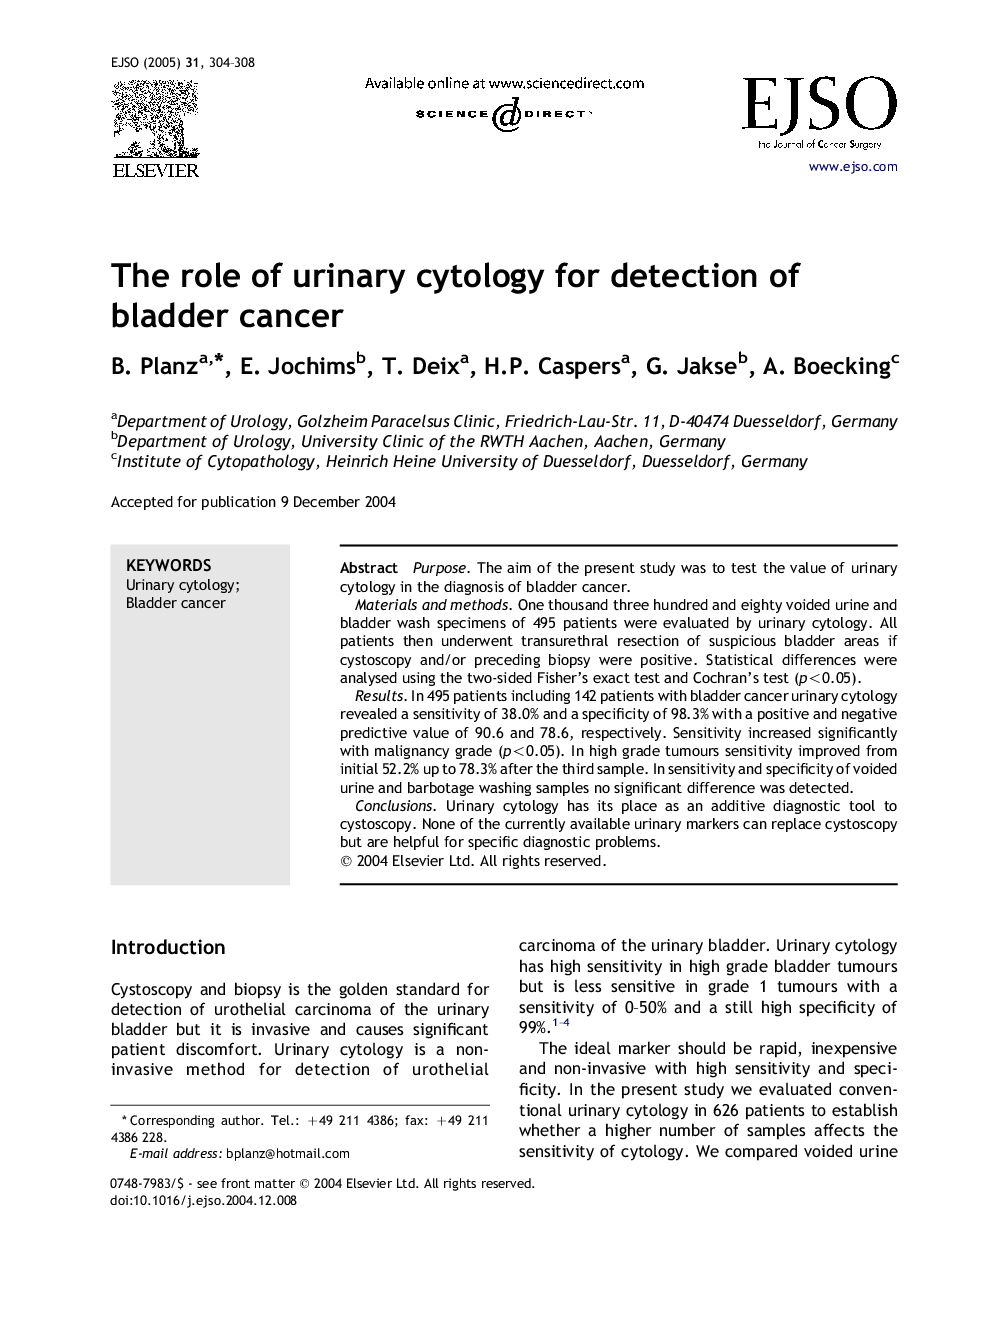 The role of urinary cytology for detection of bladder cancer